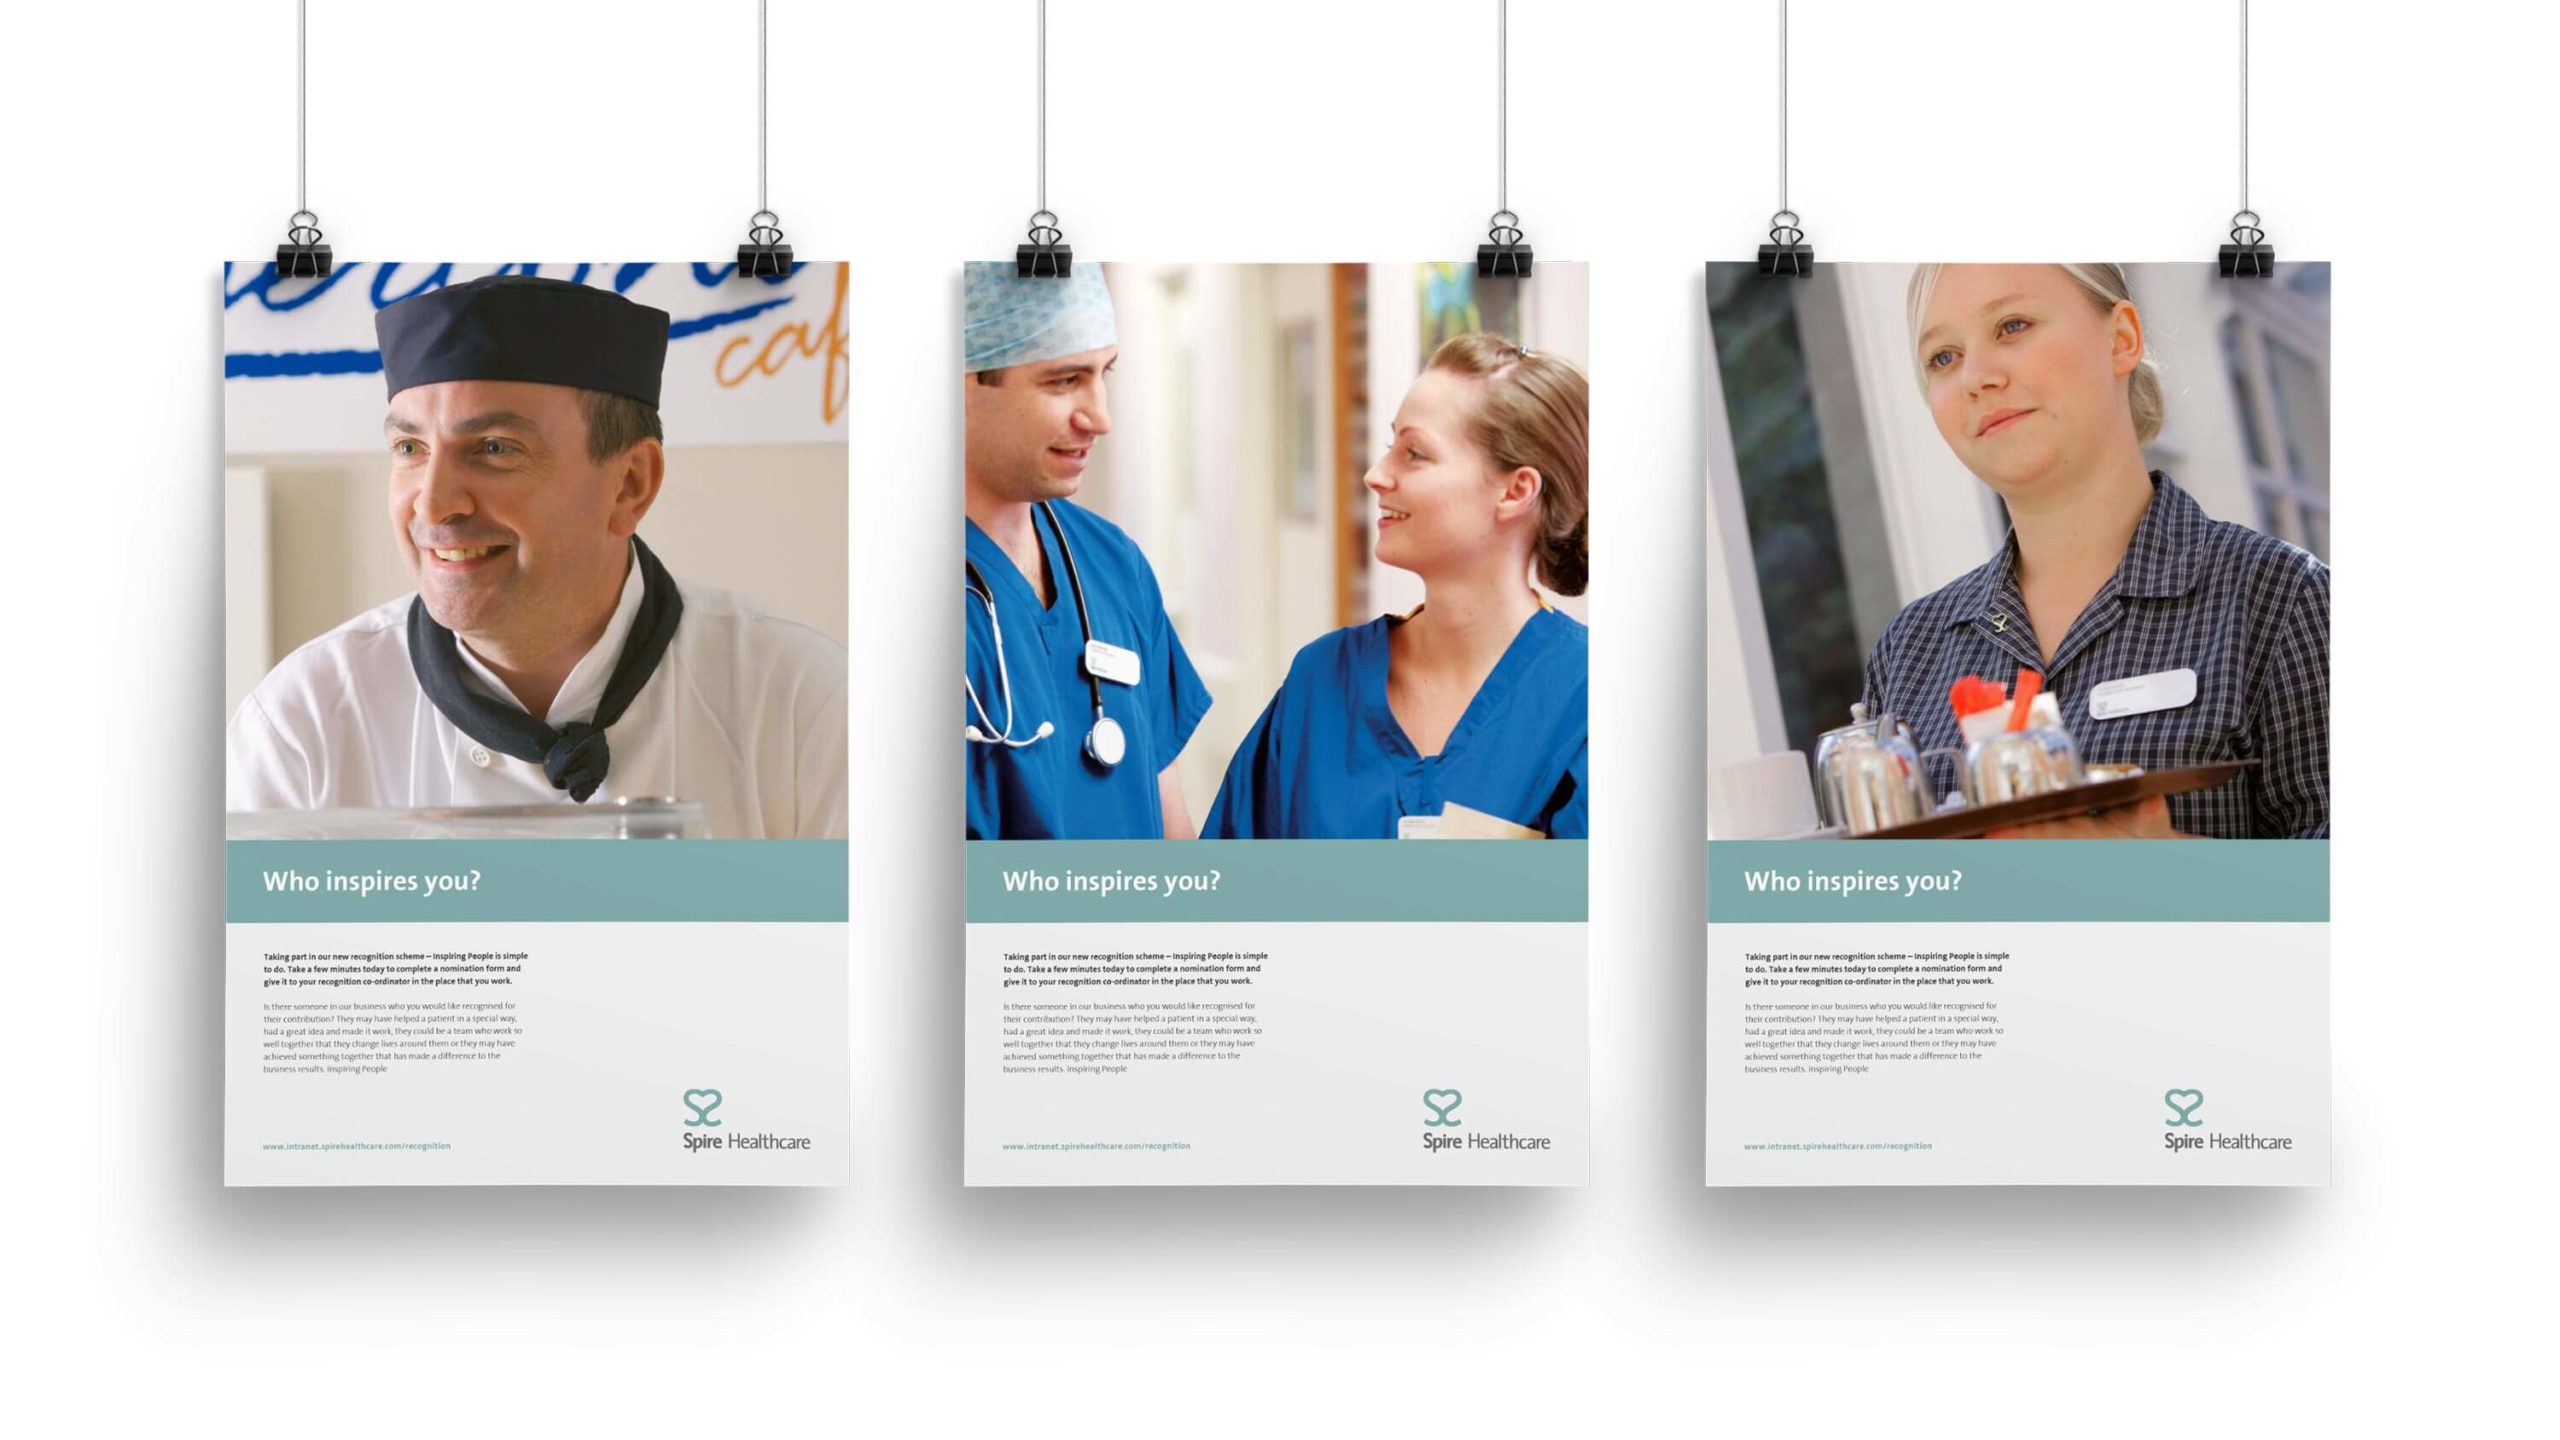 Spire Healthcare employee recognition scheme posters